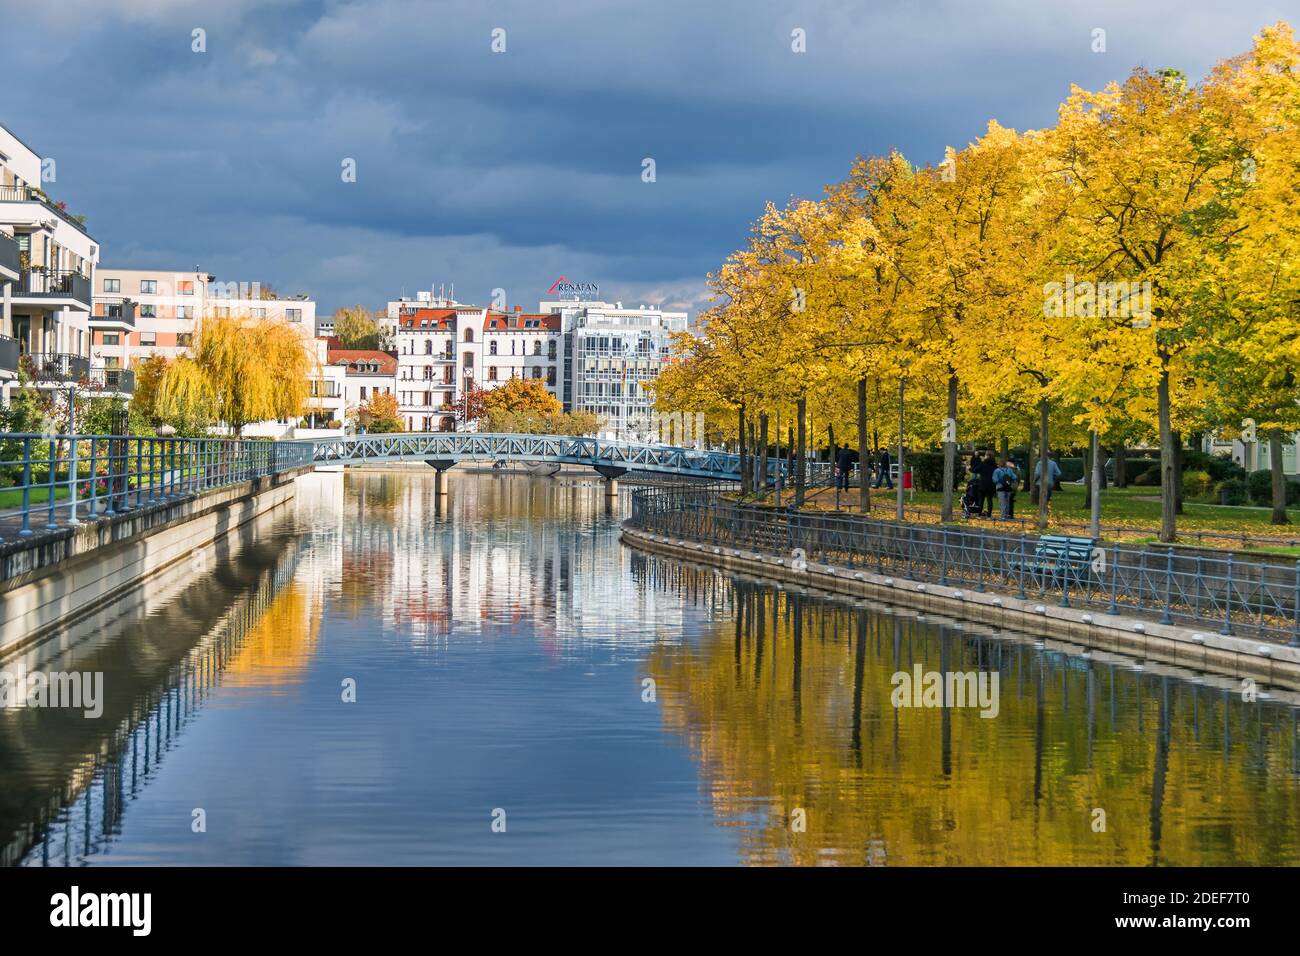 Berlin, Germany - October 24, 2020:  Harbor basin Tegeler Hafen with old and modern buildings,  residential units, footbridge and autumn coloured tree Stock Photo